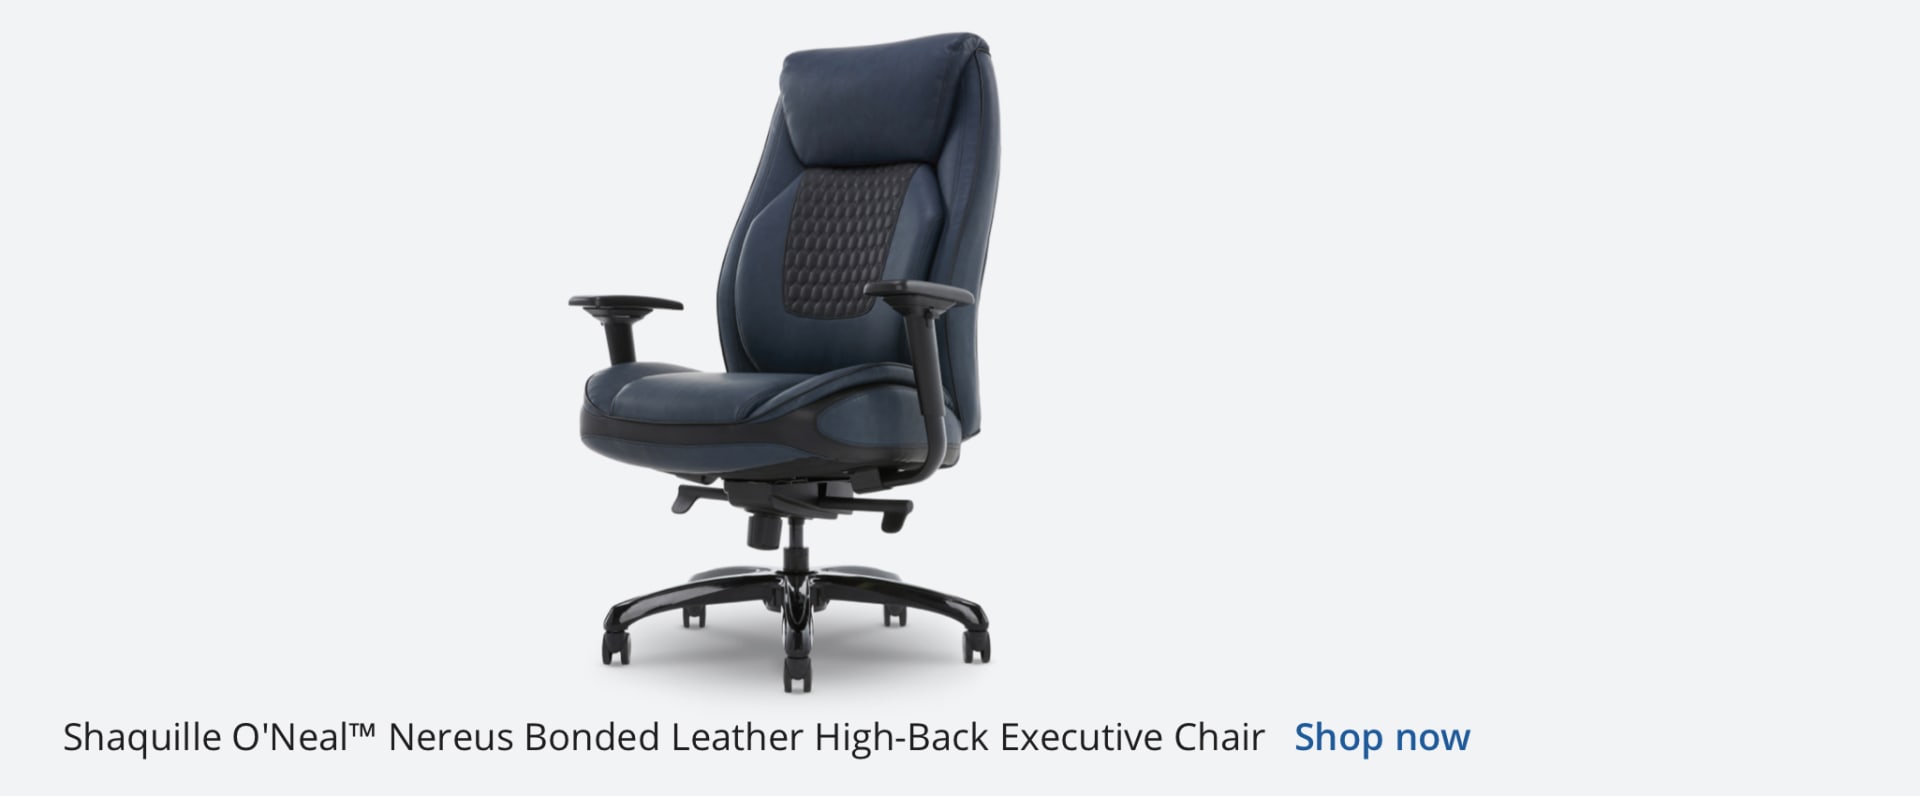 Shaquille O'Neal™ Nereus Bonded Leather High-Back Executive Chair